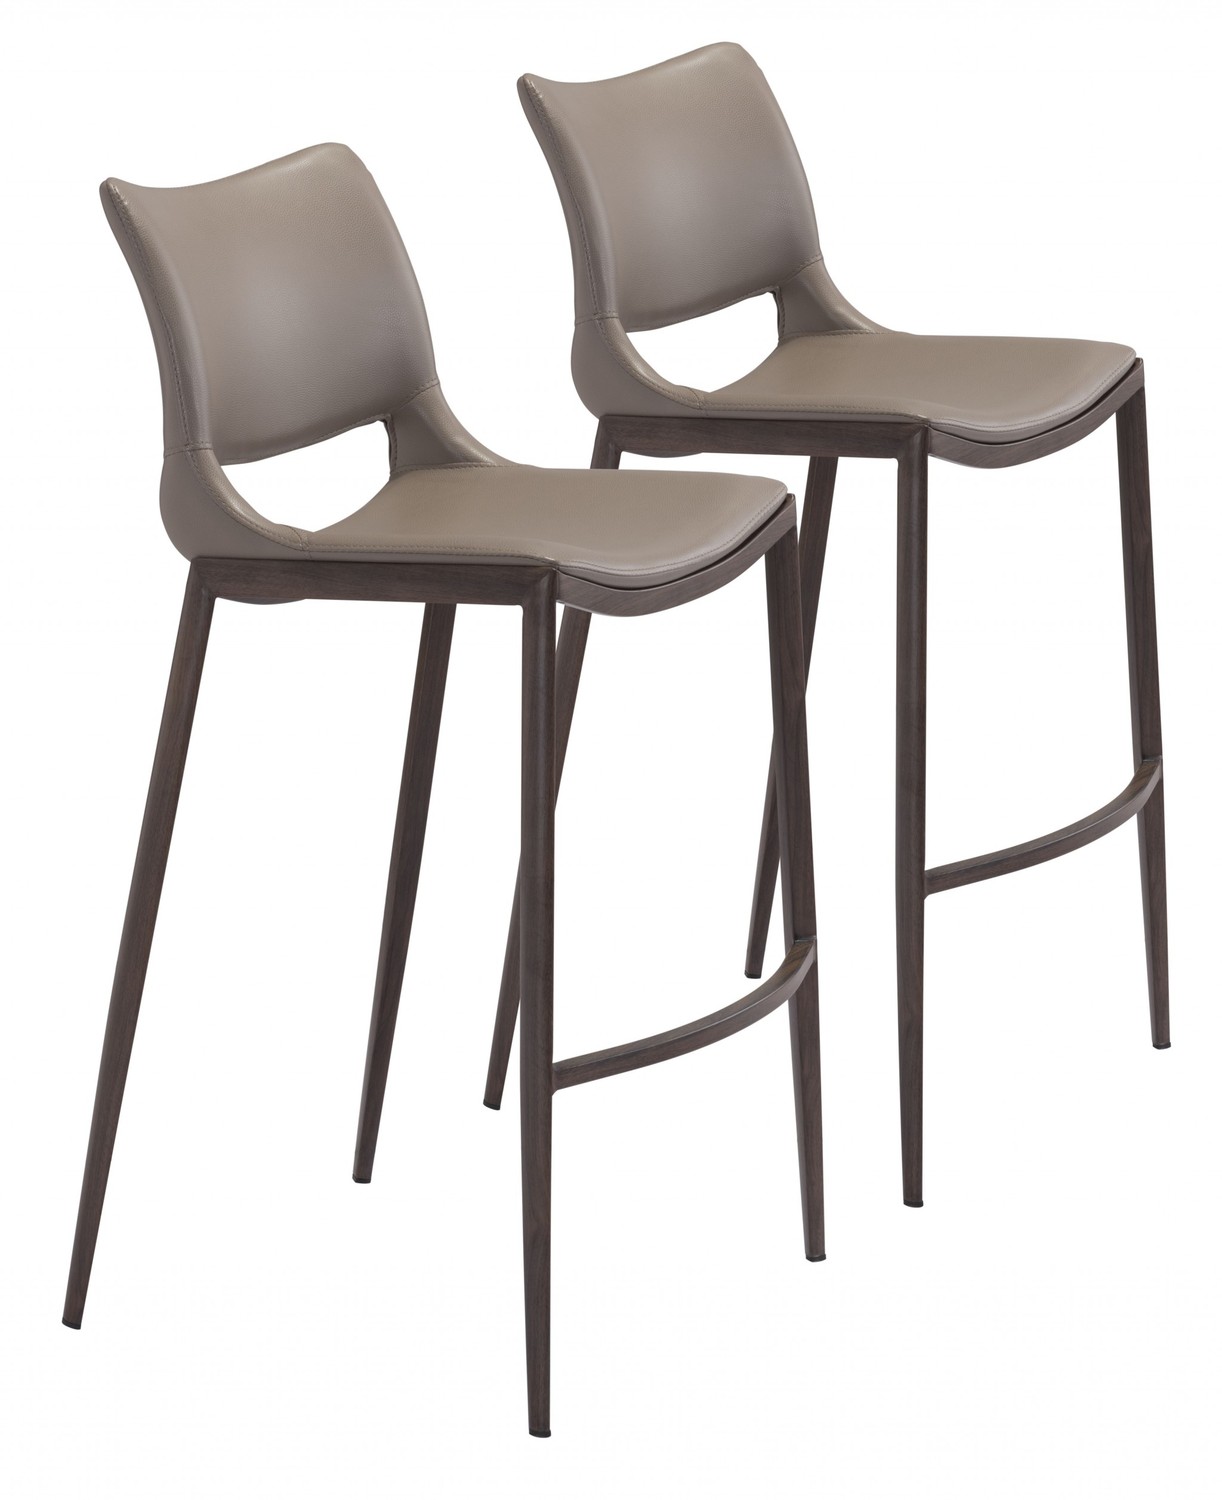 Set of Two Gray Faux Leather and Espresso Mod Ergo Bar Chairs